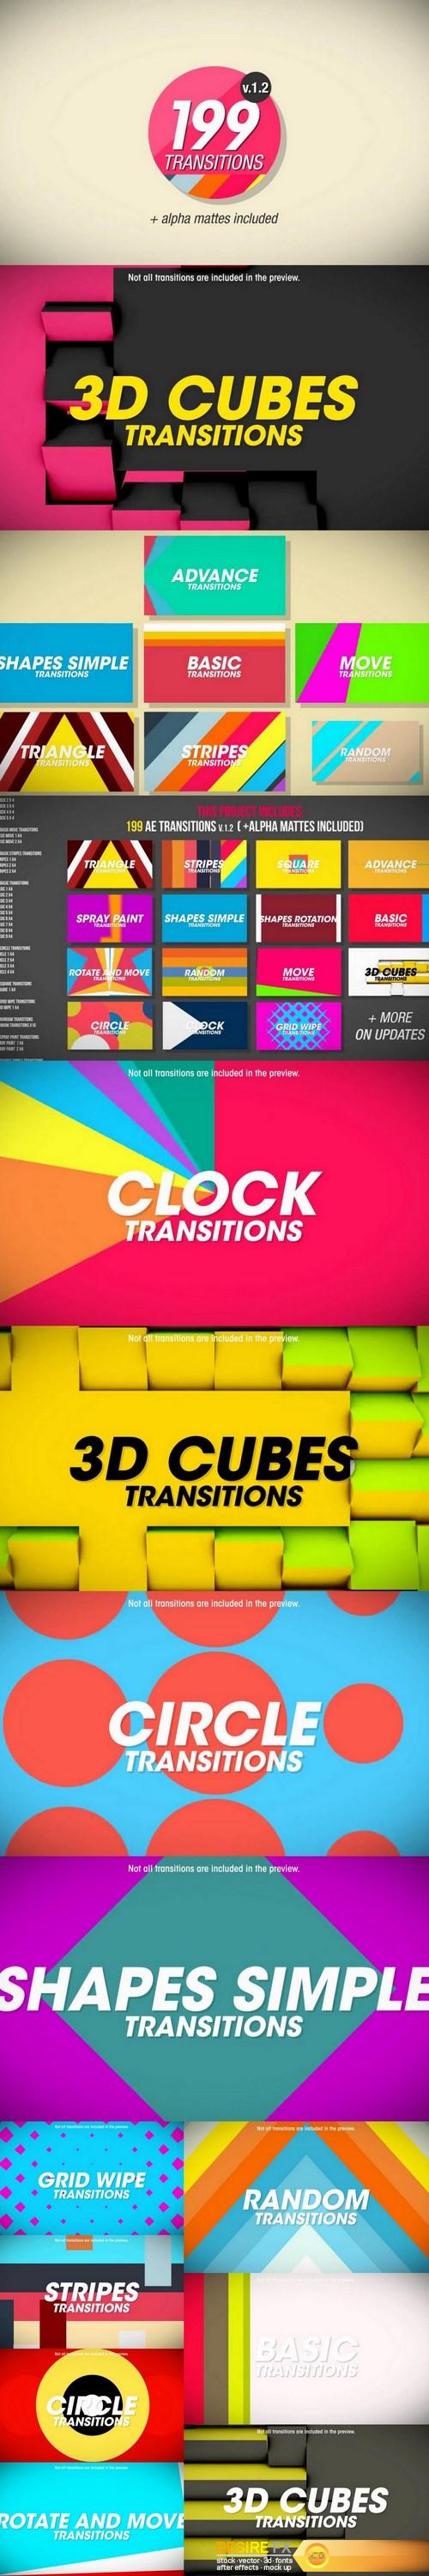 videohive-8934642-199-transitions-pack-v12